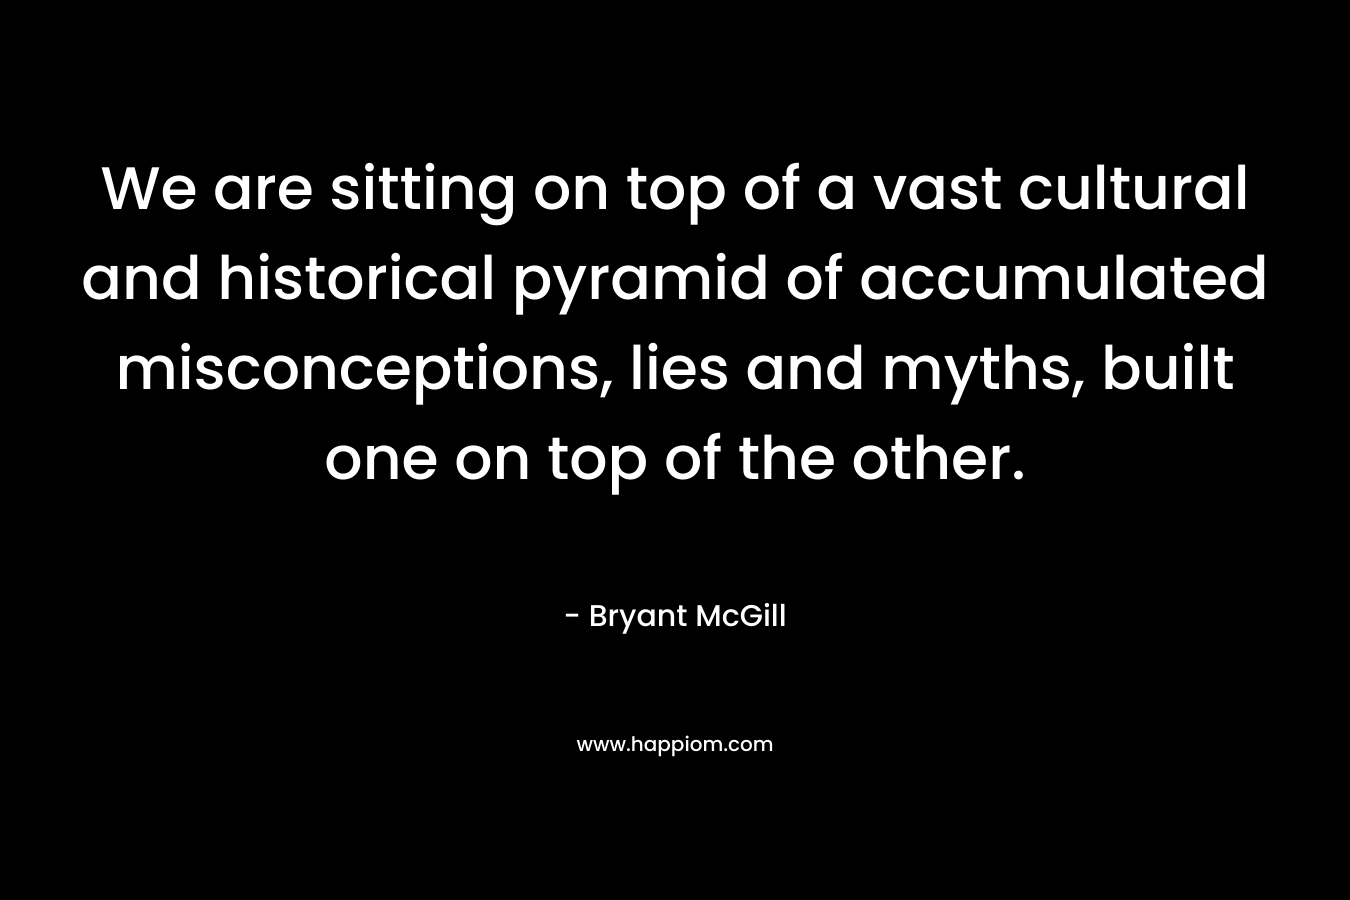 We are sitting on top of a vast cultural and historical pyramid of accumulated misconceptions, lies and myths, built one on top of the other.